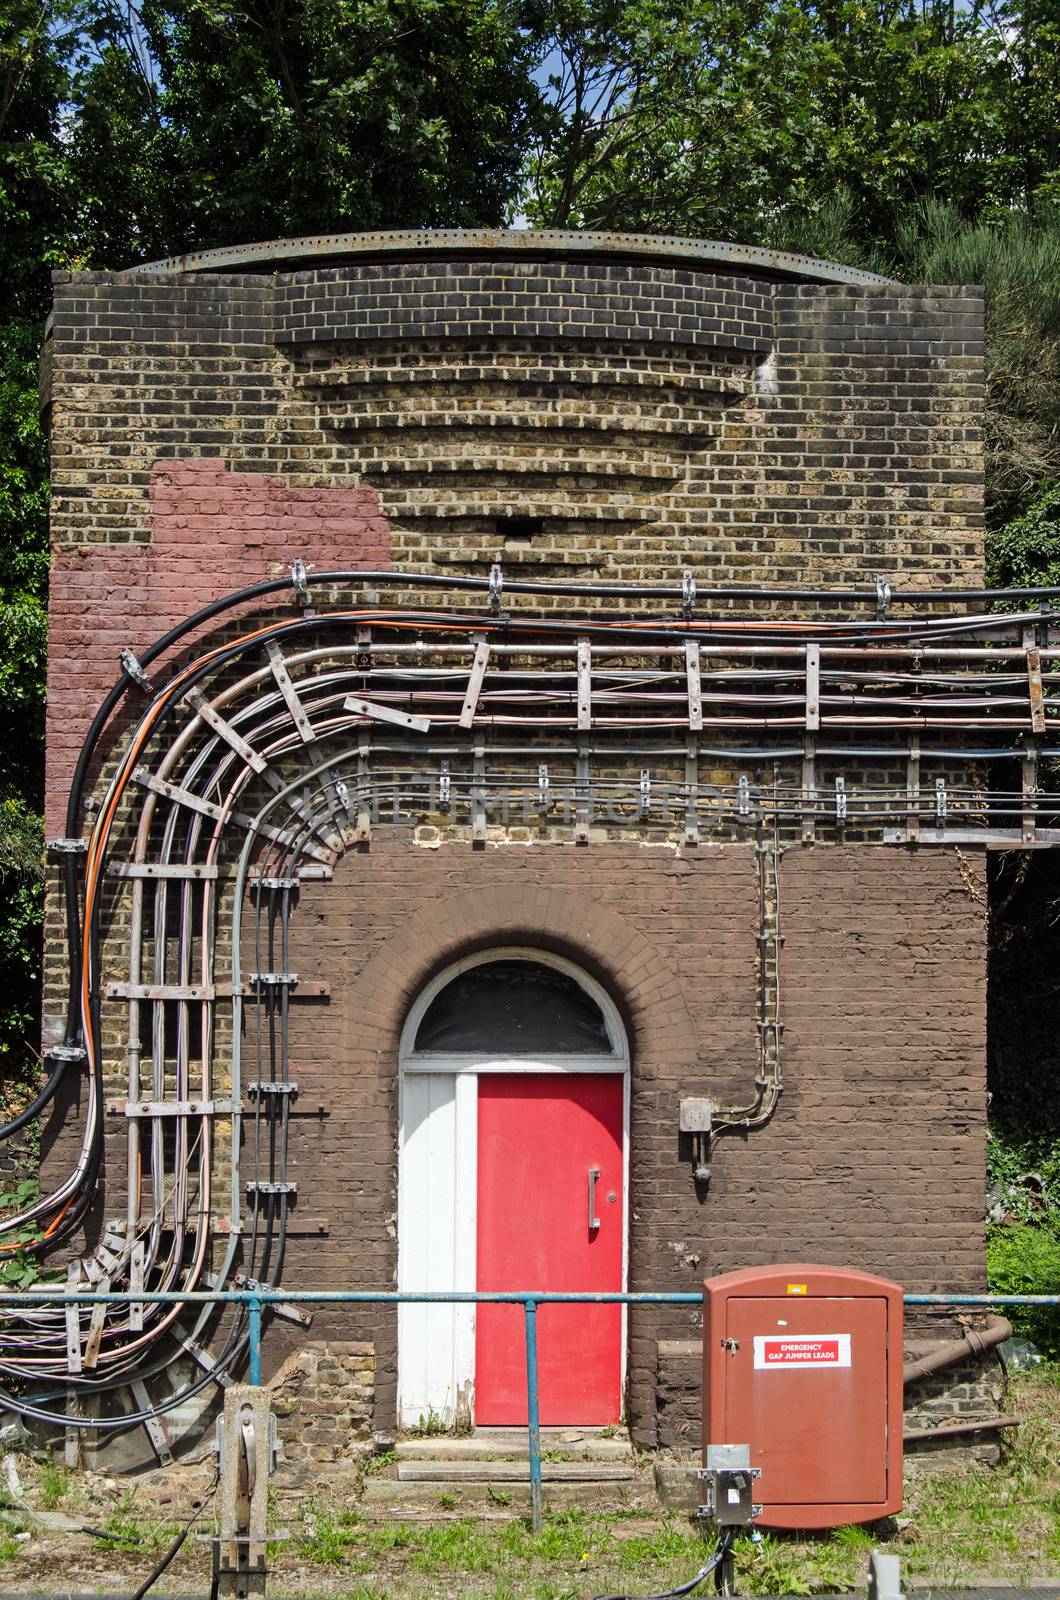 A small brick Art Deco building covered in electrical cables in the sidings at Ealing Broadway station in West London.